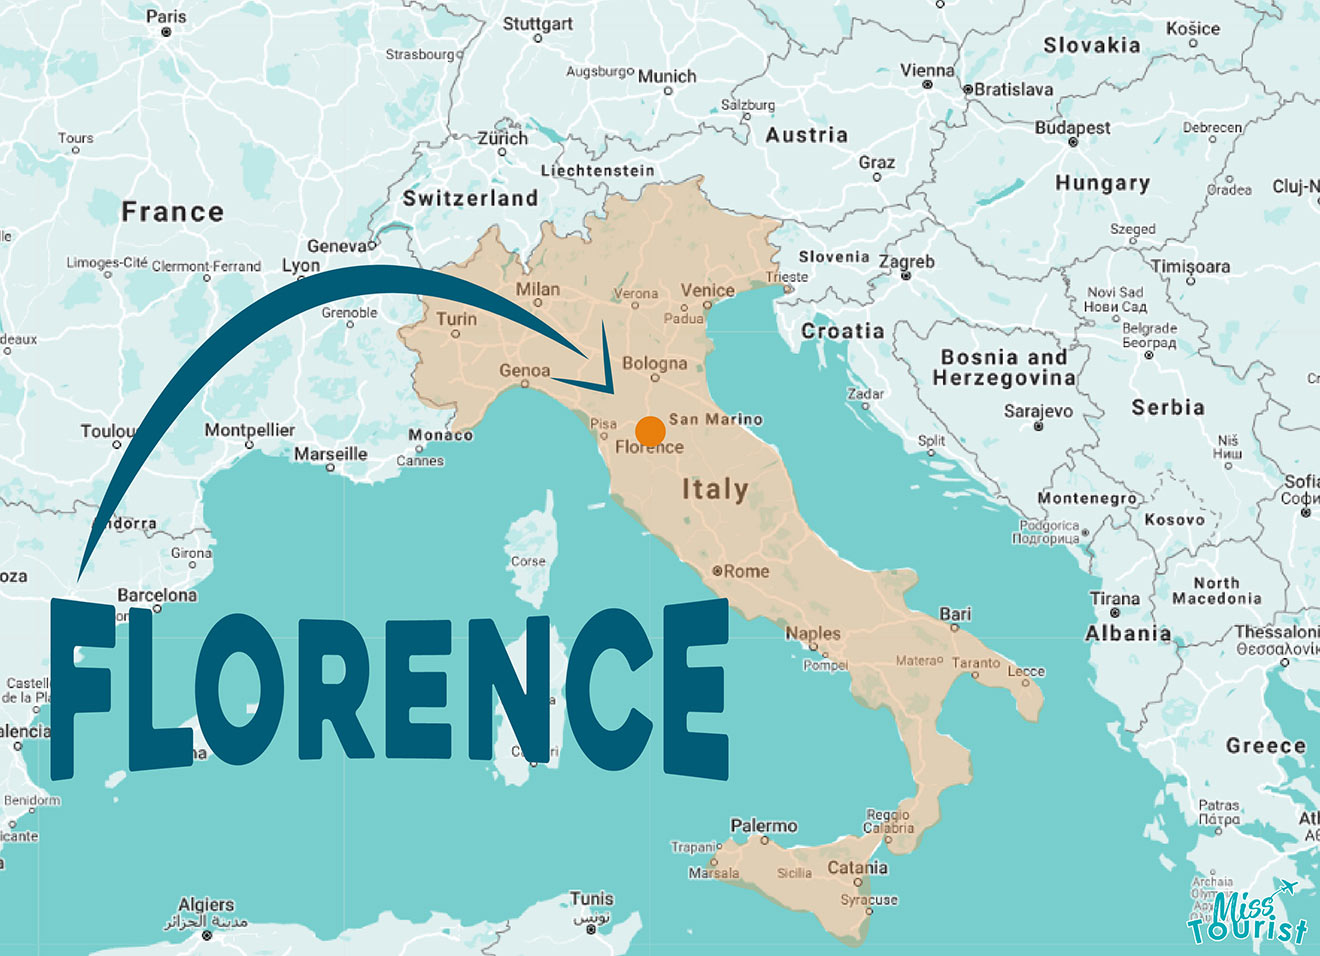 FlorenceOverviewMap 660x478@2x 